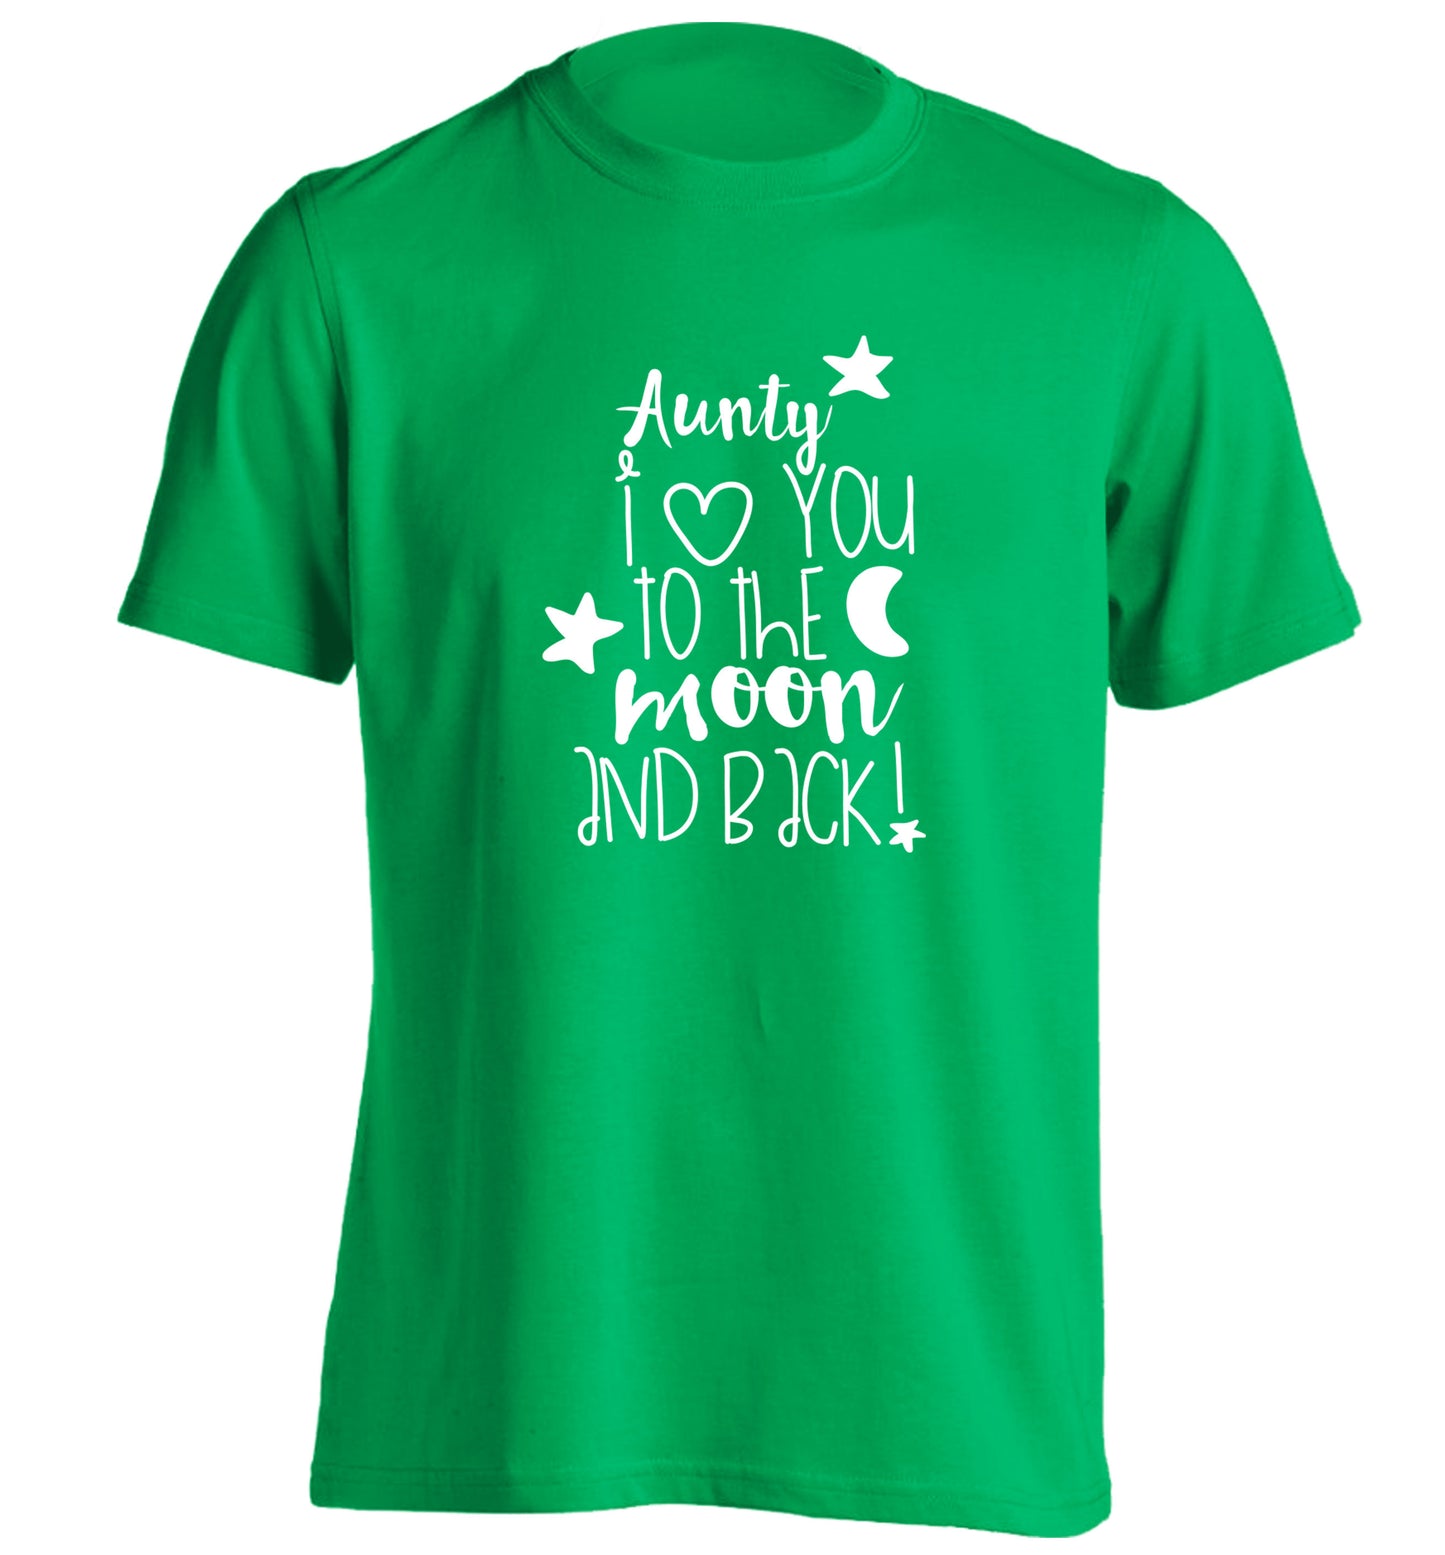 Aunty I love you to the moon and back adults unisex green Tshirt 2XL